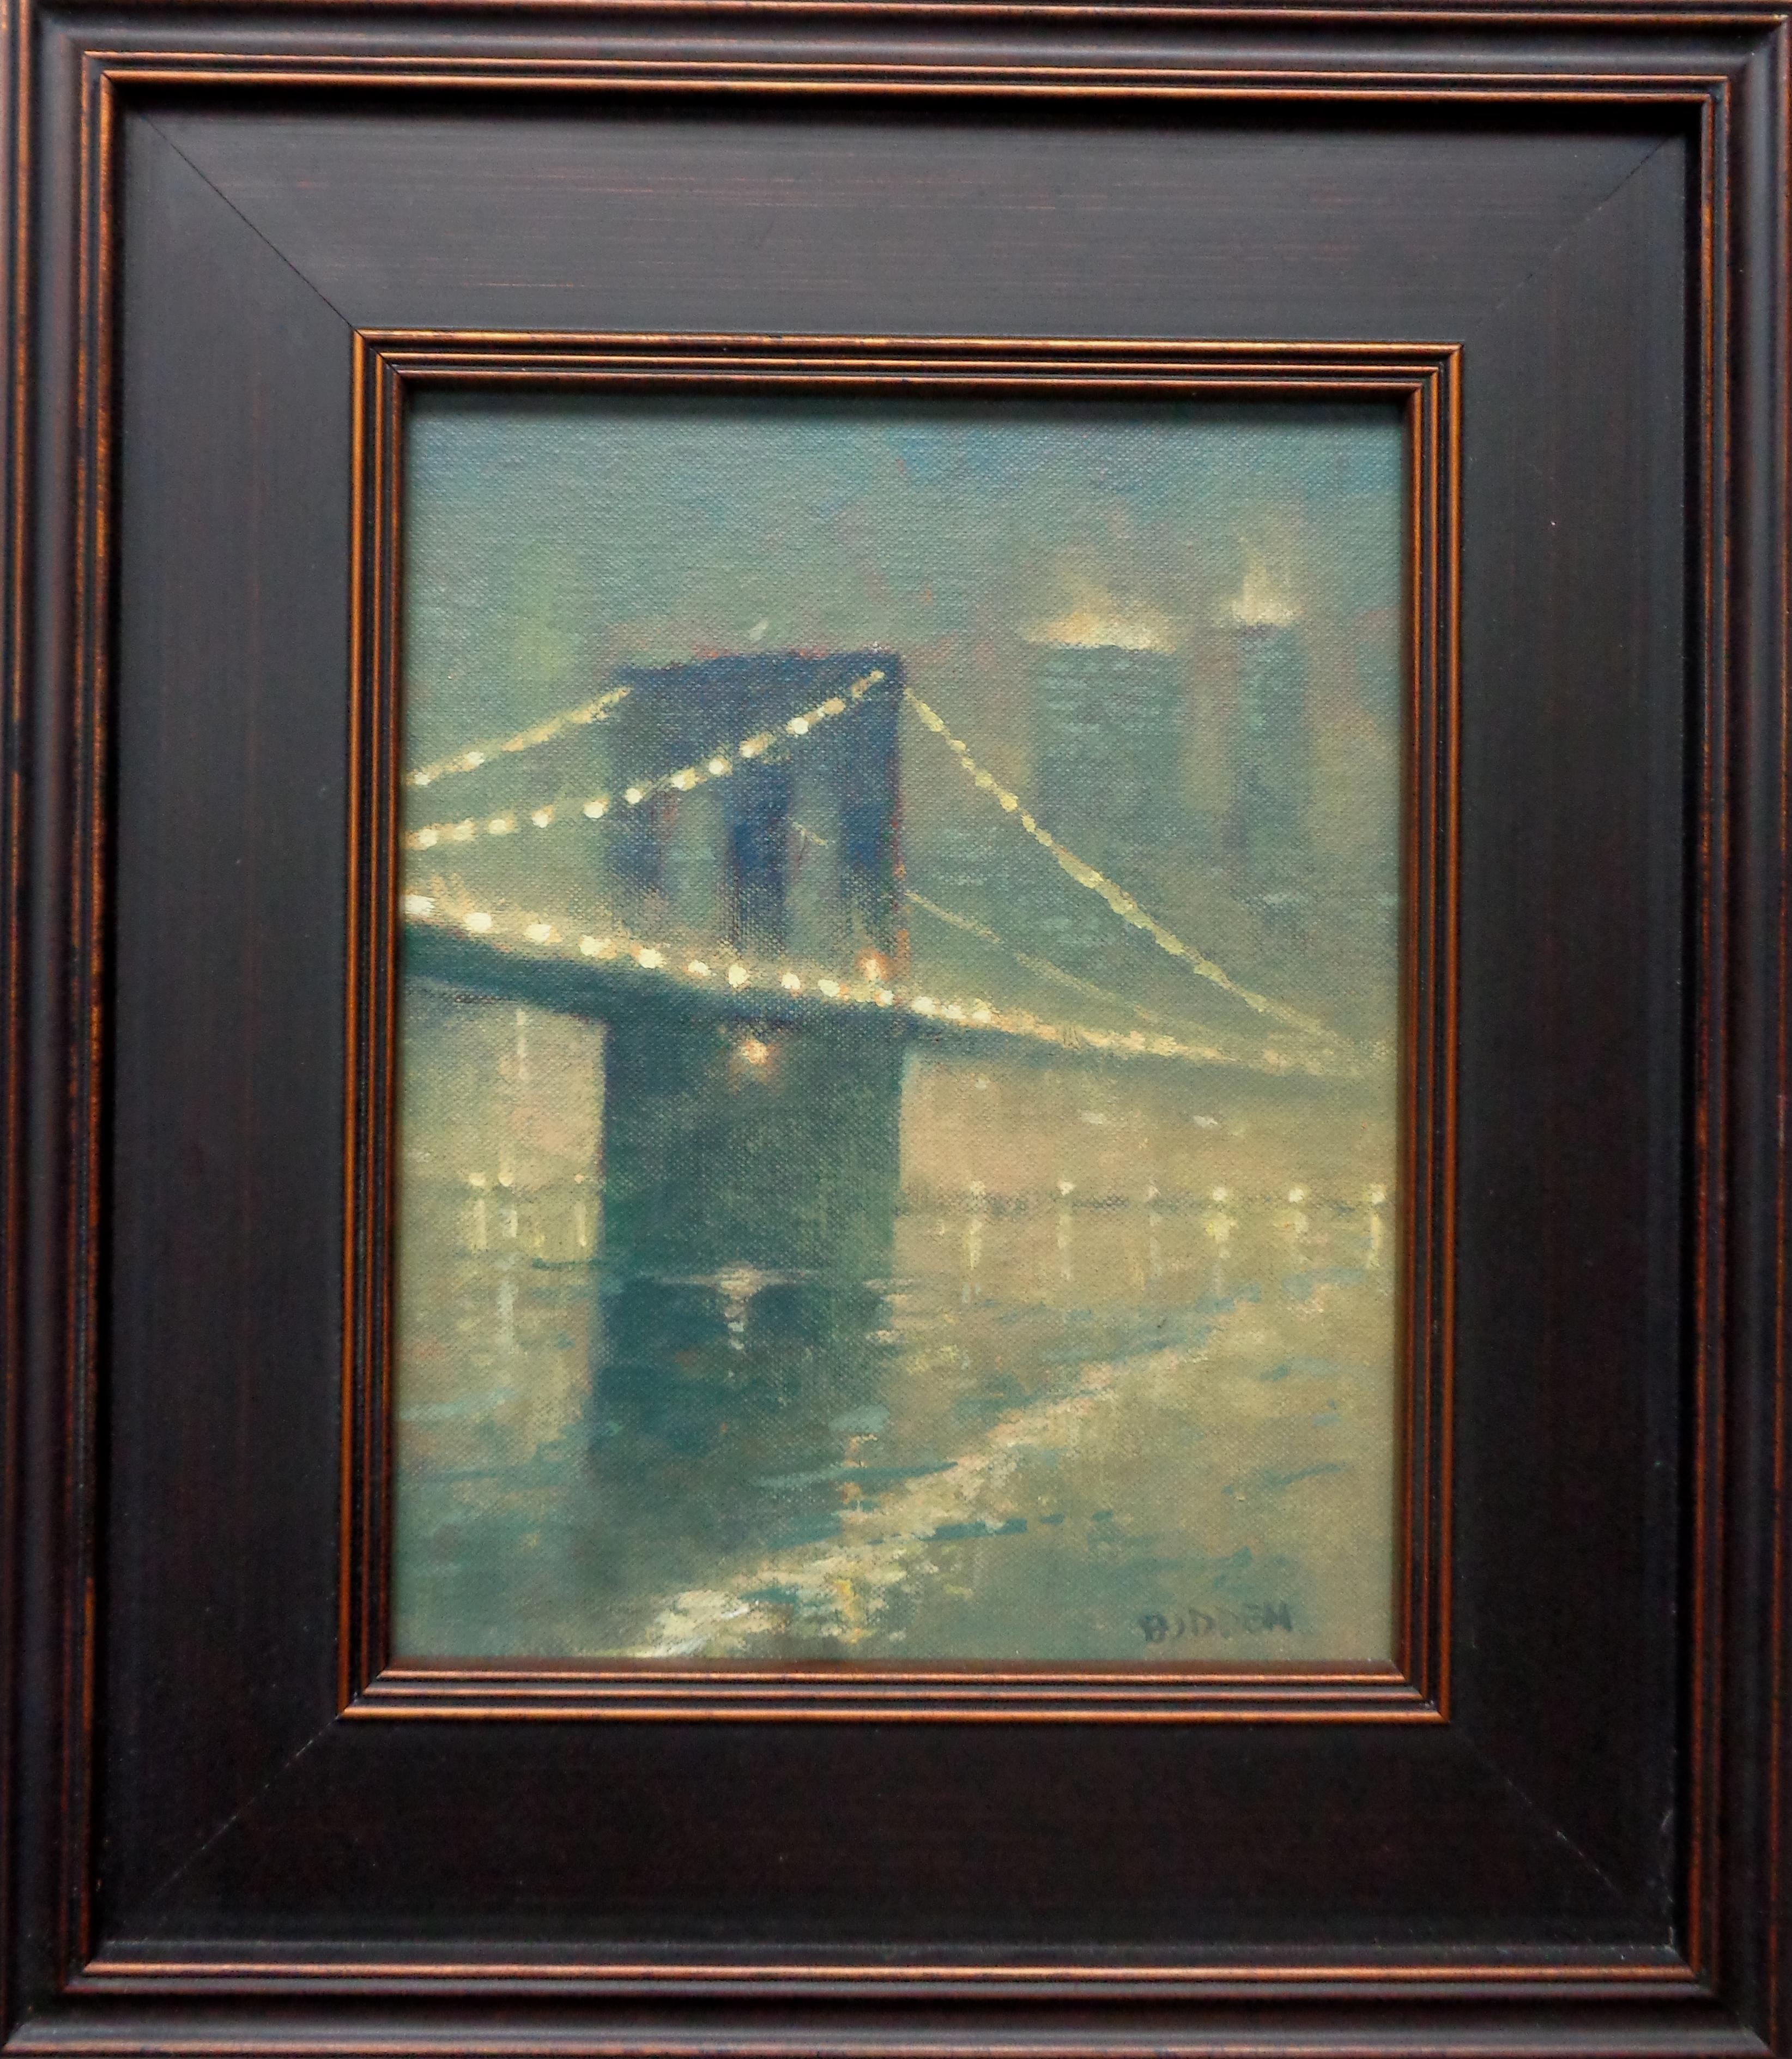 Foggy Evening Brooklyn Bridge is an oil painting on panel by award winning contemporary artist Michael Budden that showcases a view of the Brooklyn Bridge on a foggy evening in  New York City. Painting image measure 10 x 8 unframed and 16 x 13